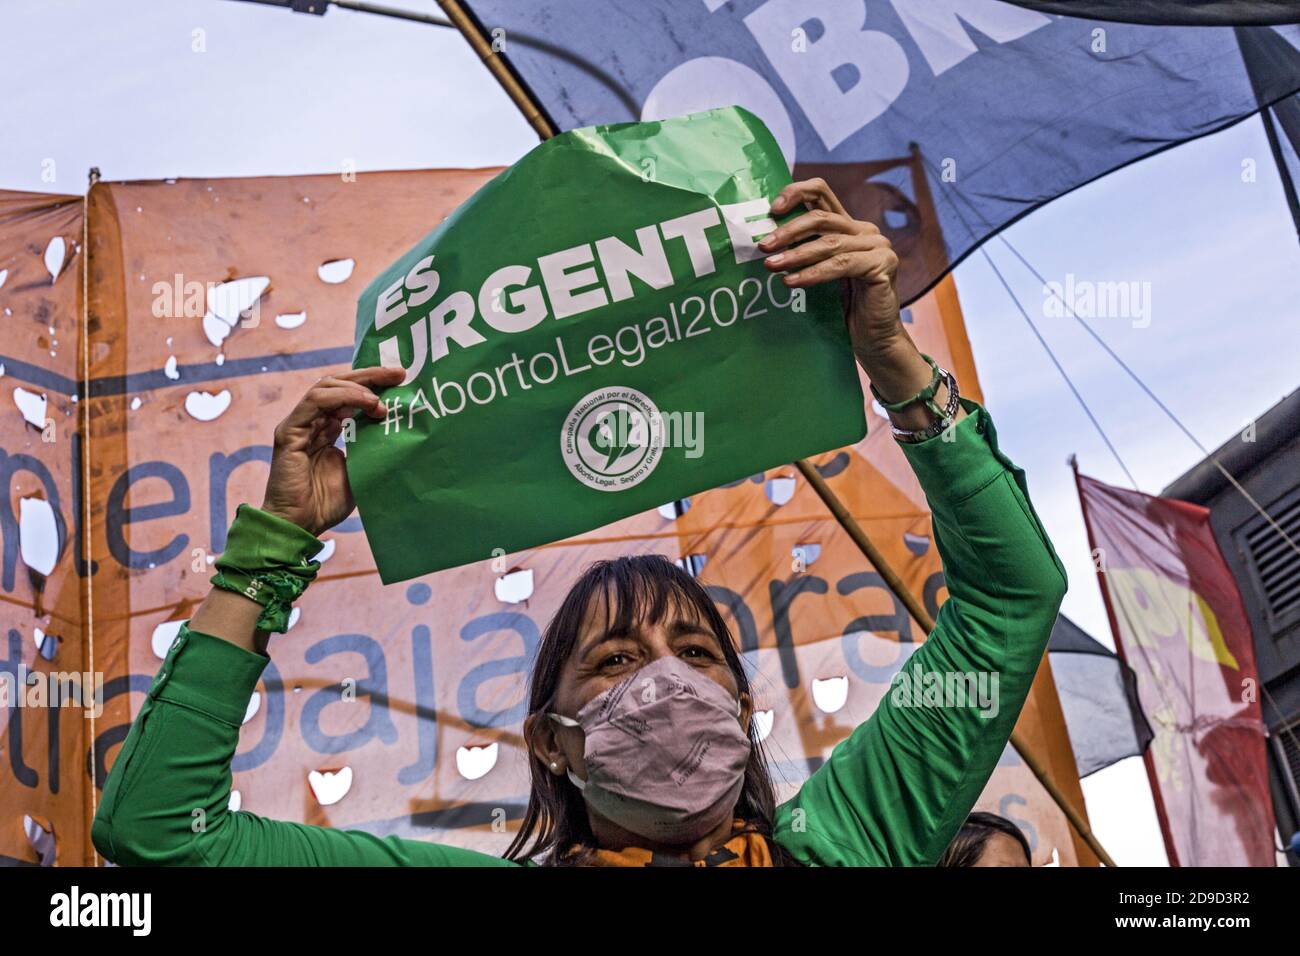 Buenos Aires, Federal Capital, Argentina. 4th Nov, 2020. A new mobilization was held in the vicinity of the Congress of the Argentine Nation in the city of Buenos Aires to demand the treatment of the Law of Legal, Safe and Free Abortion. Under the slogan ''It is Urgent'', the so-called ''Green Tide'' returned to the streets despite the health emergency due to COVID-19 and the restrictions of social isolation. Credit: Roberto Almeida Aveledo/ZUMA Wire/Alamy Live News Stock Photo